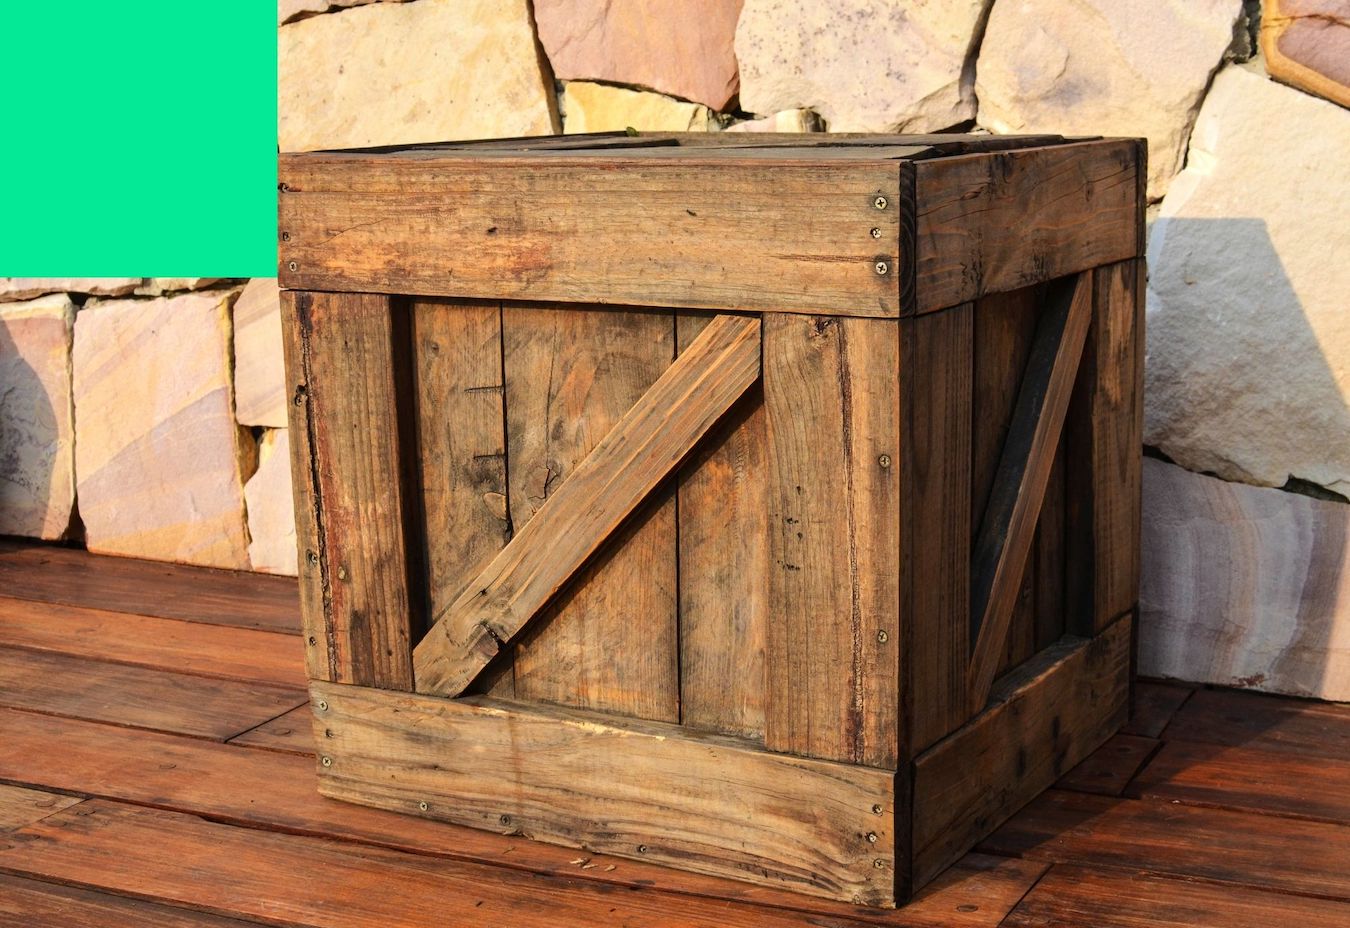 A wooden crate sits in the ground. It is used for wrapping and shipping paintings.